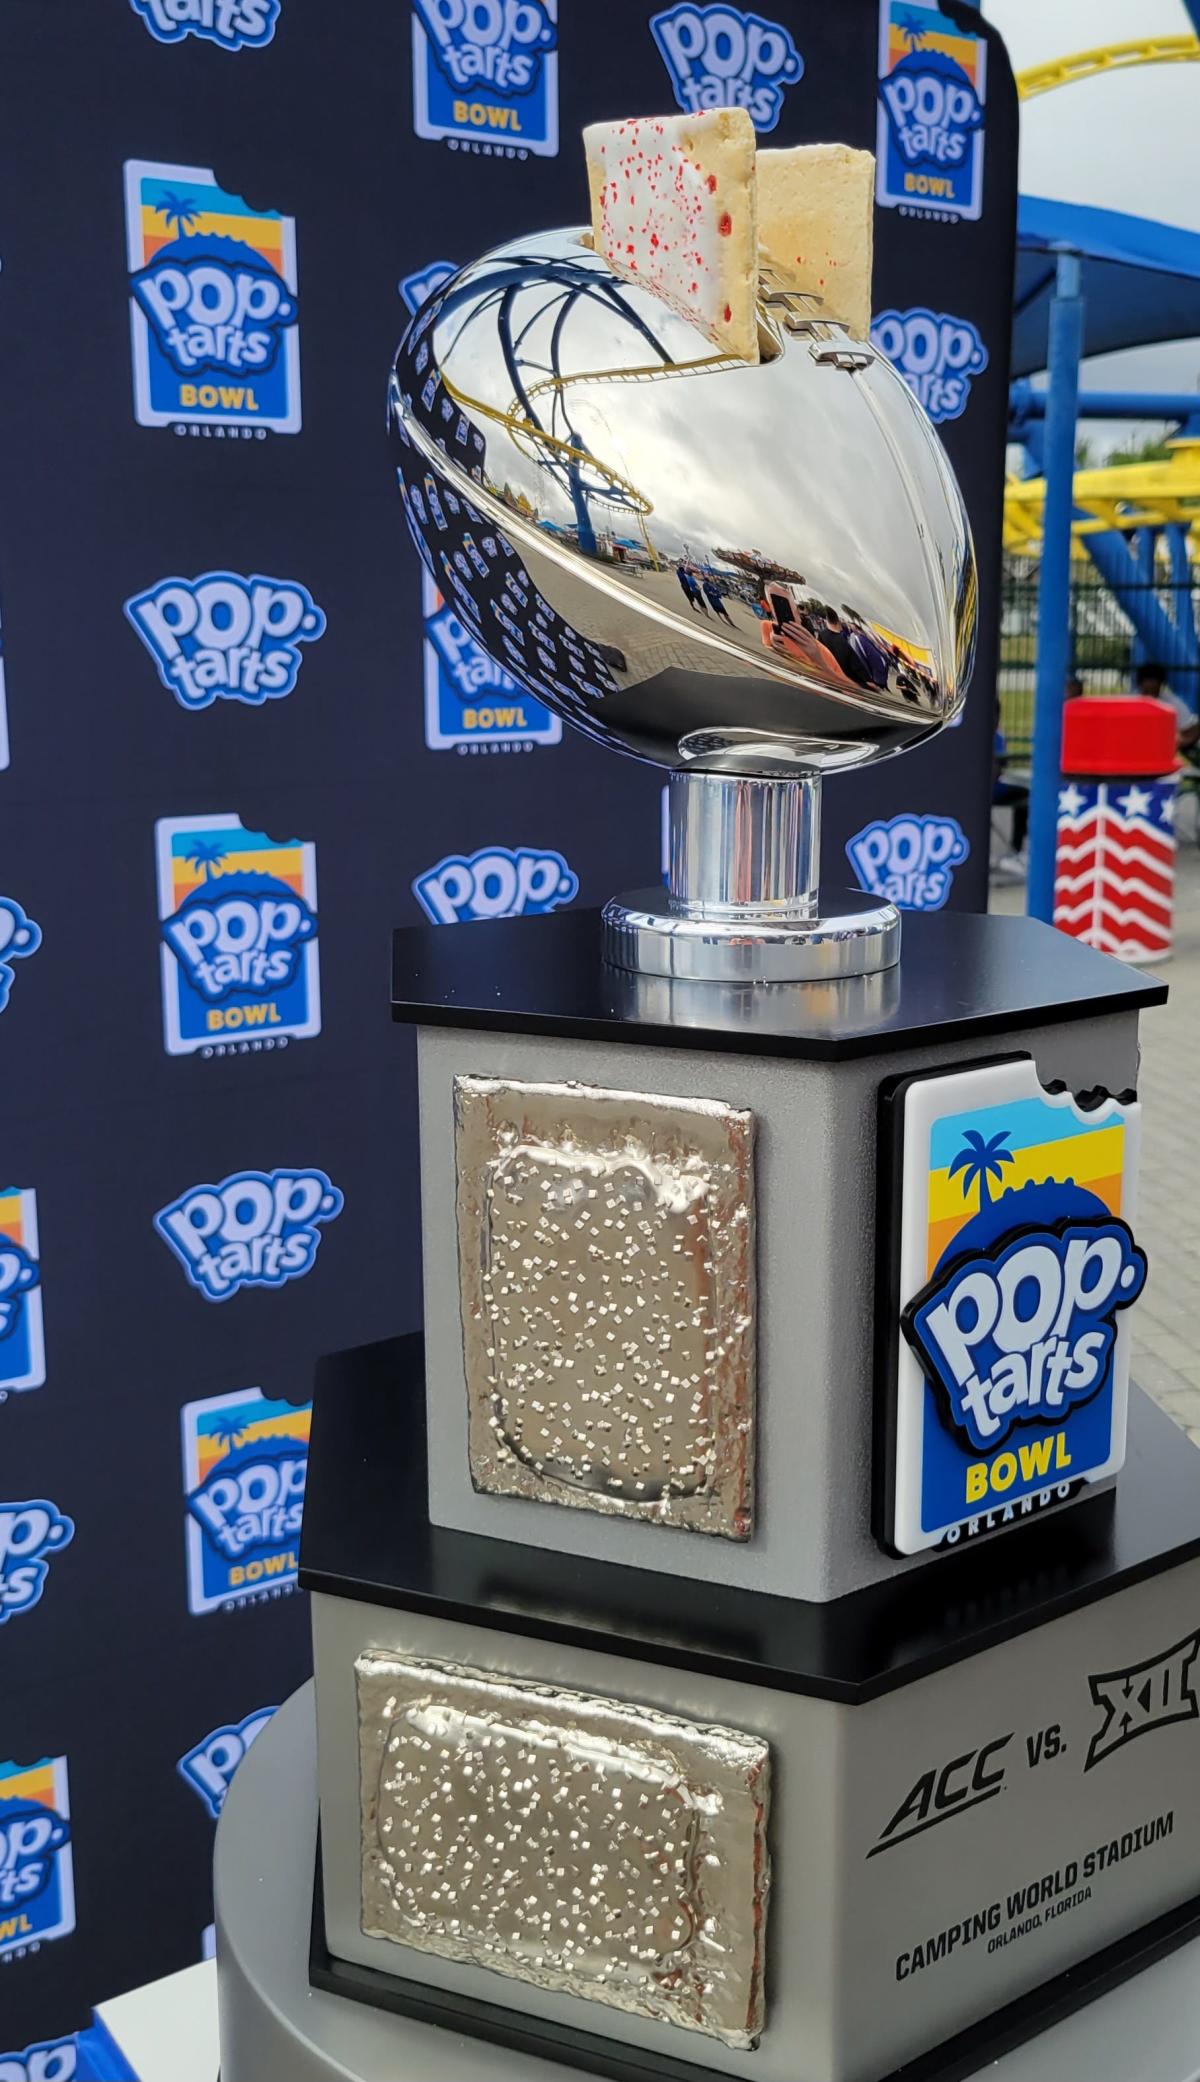 Kansas State football will play for a PopTarts Bowl trophy that's a